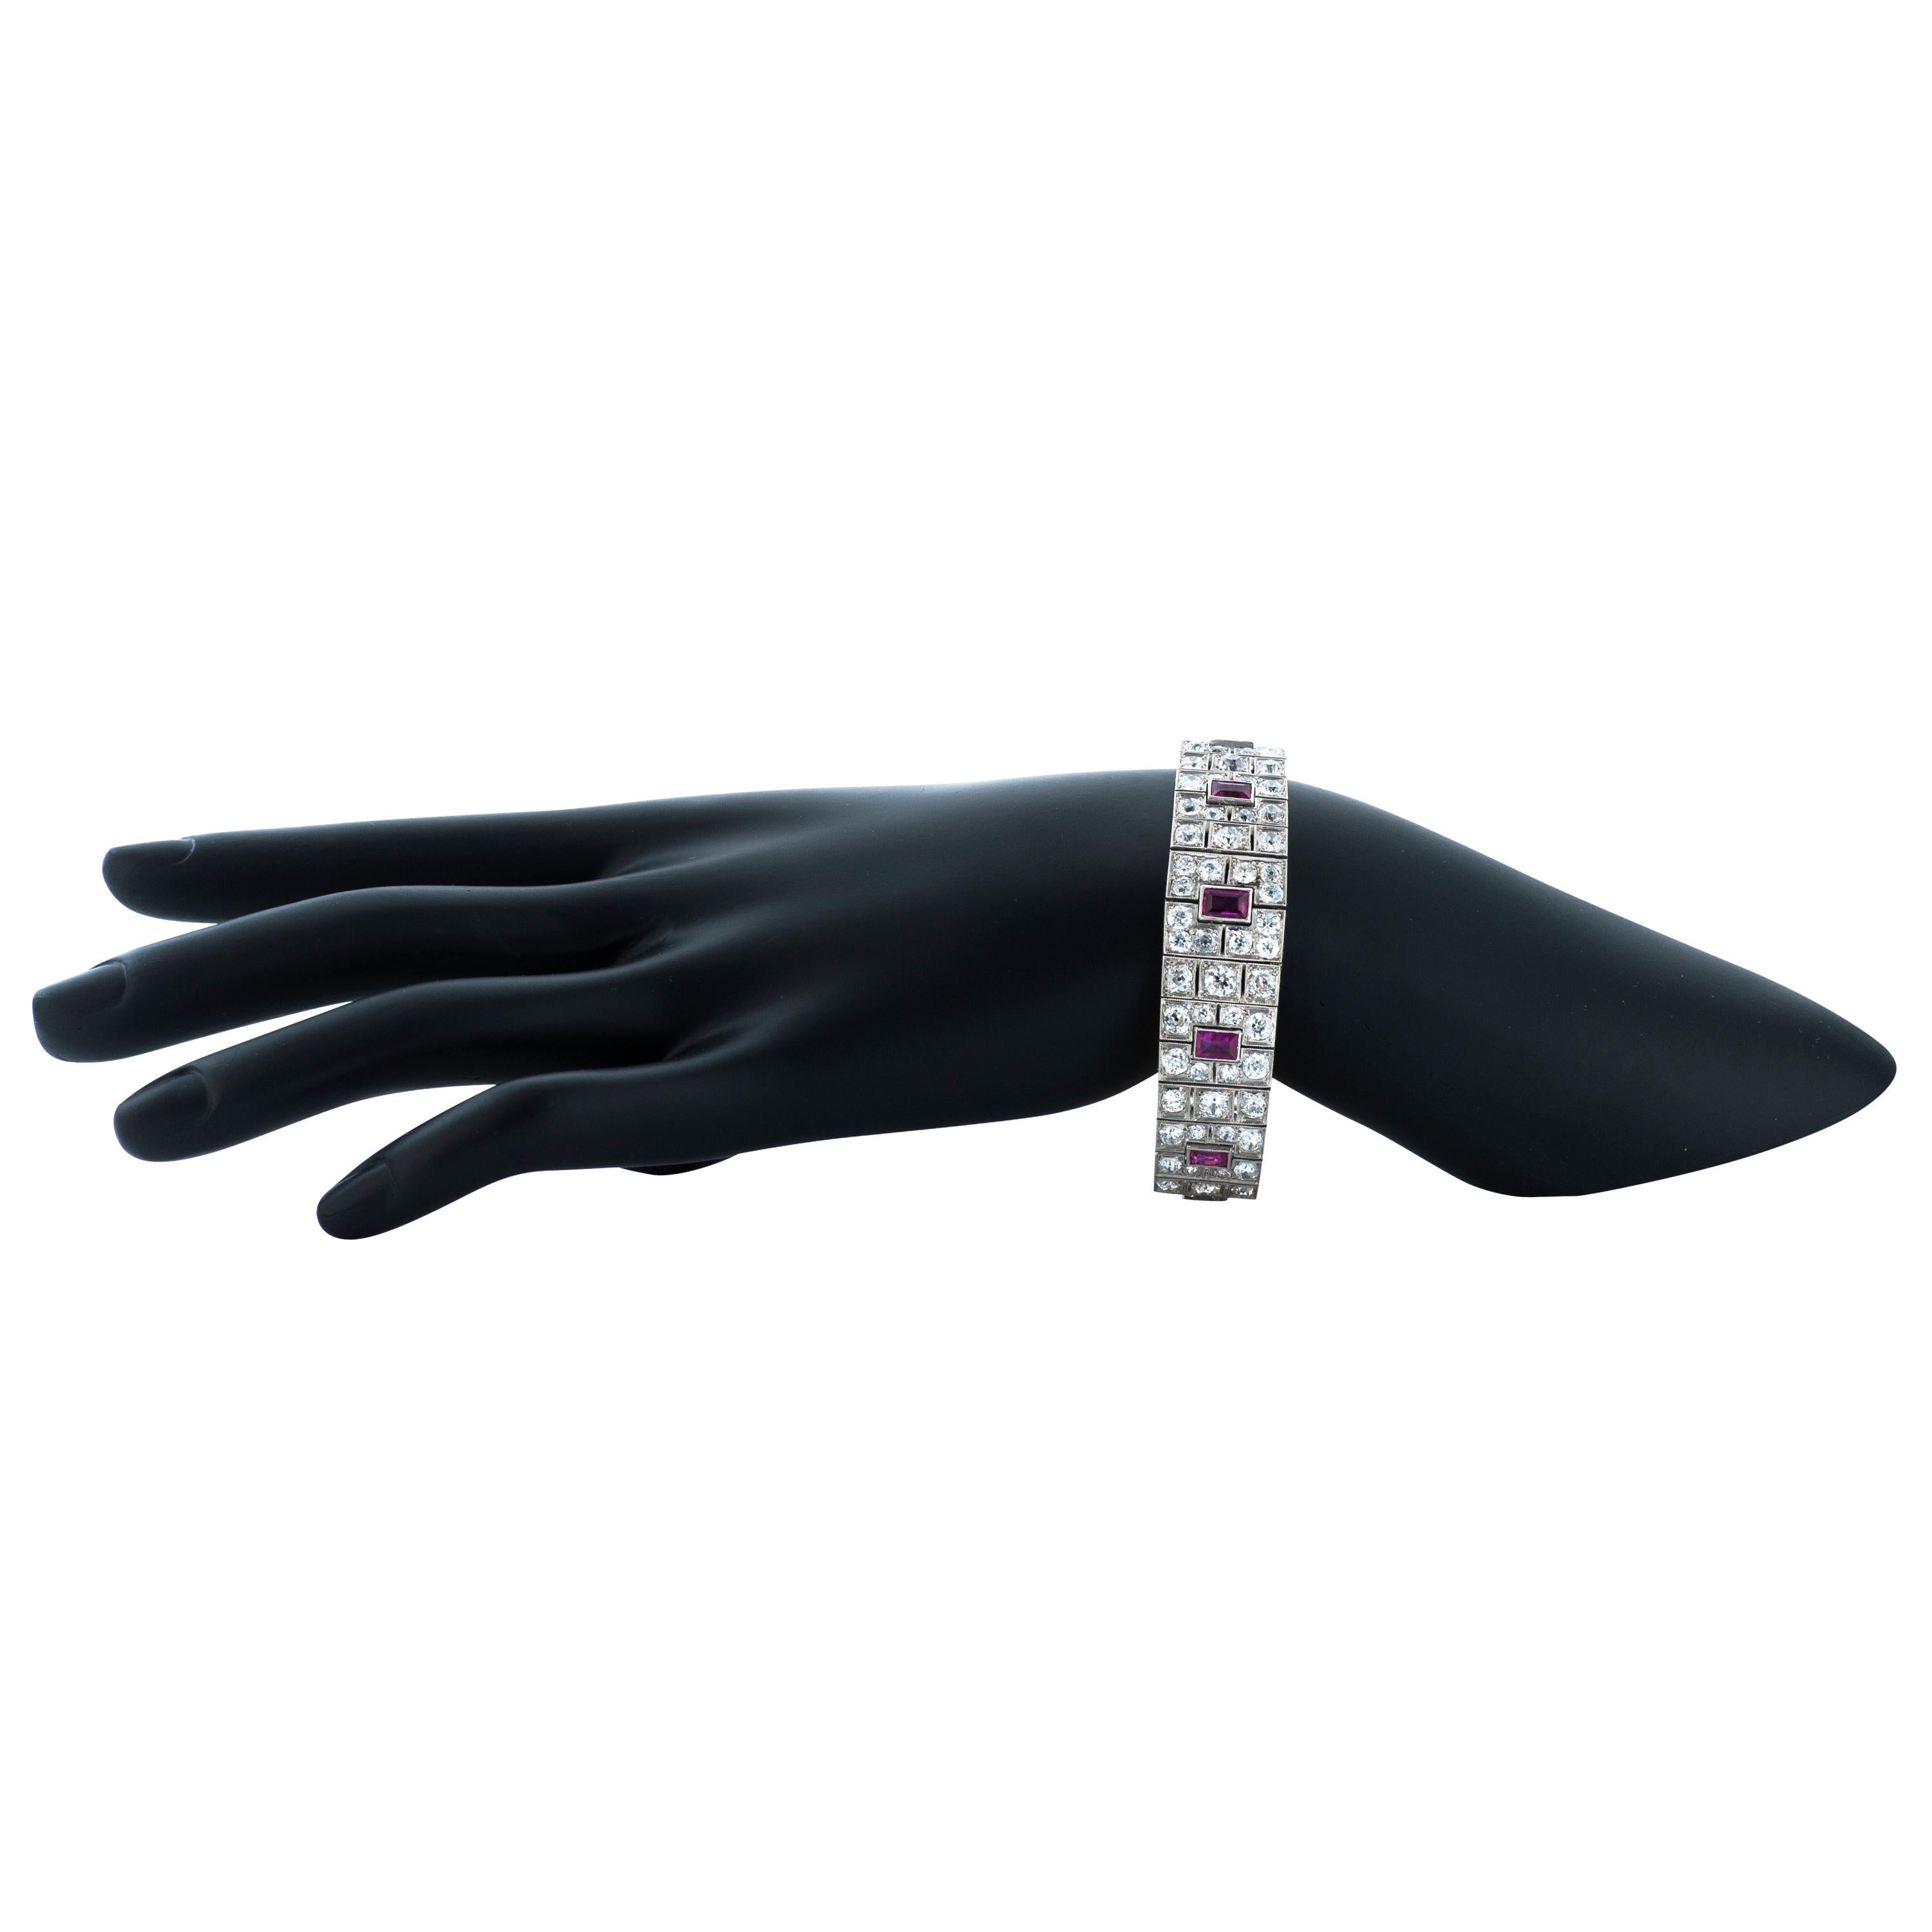 Art Deco platinum ruby and diamond bracelet with French Hallmarks.  

This bracelet contains 8 baguette shaped rubies totaling approximately 5.00 carats,  as well as 140 old European cut diamonds totaling approximately 20.00 carats with H-I-J color